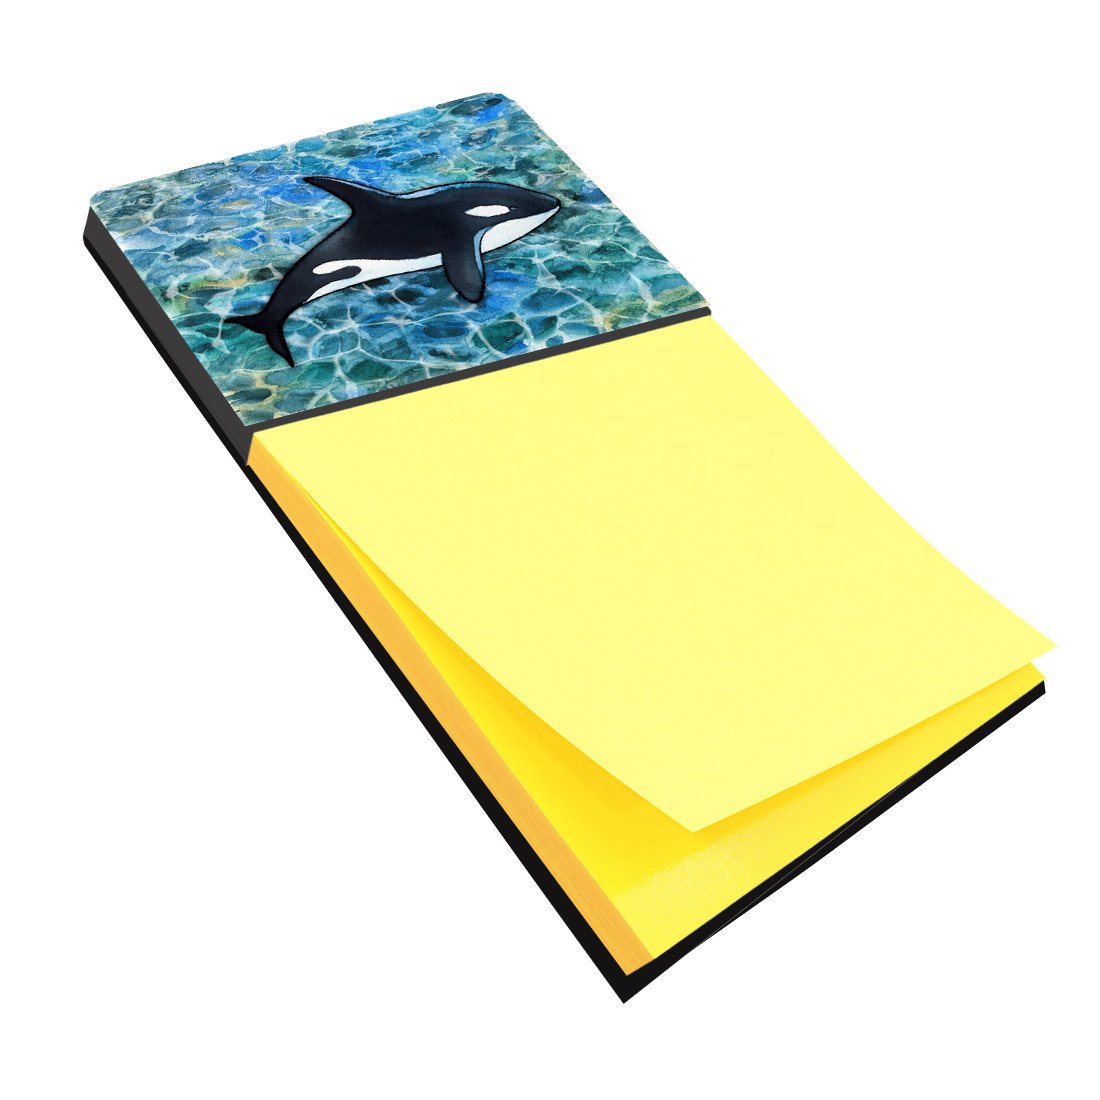 Killer Whale Orca Sticky Note Holder BB5348SN by Caroline's Treasures